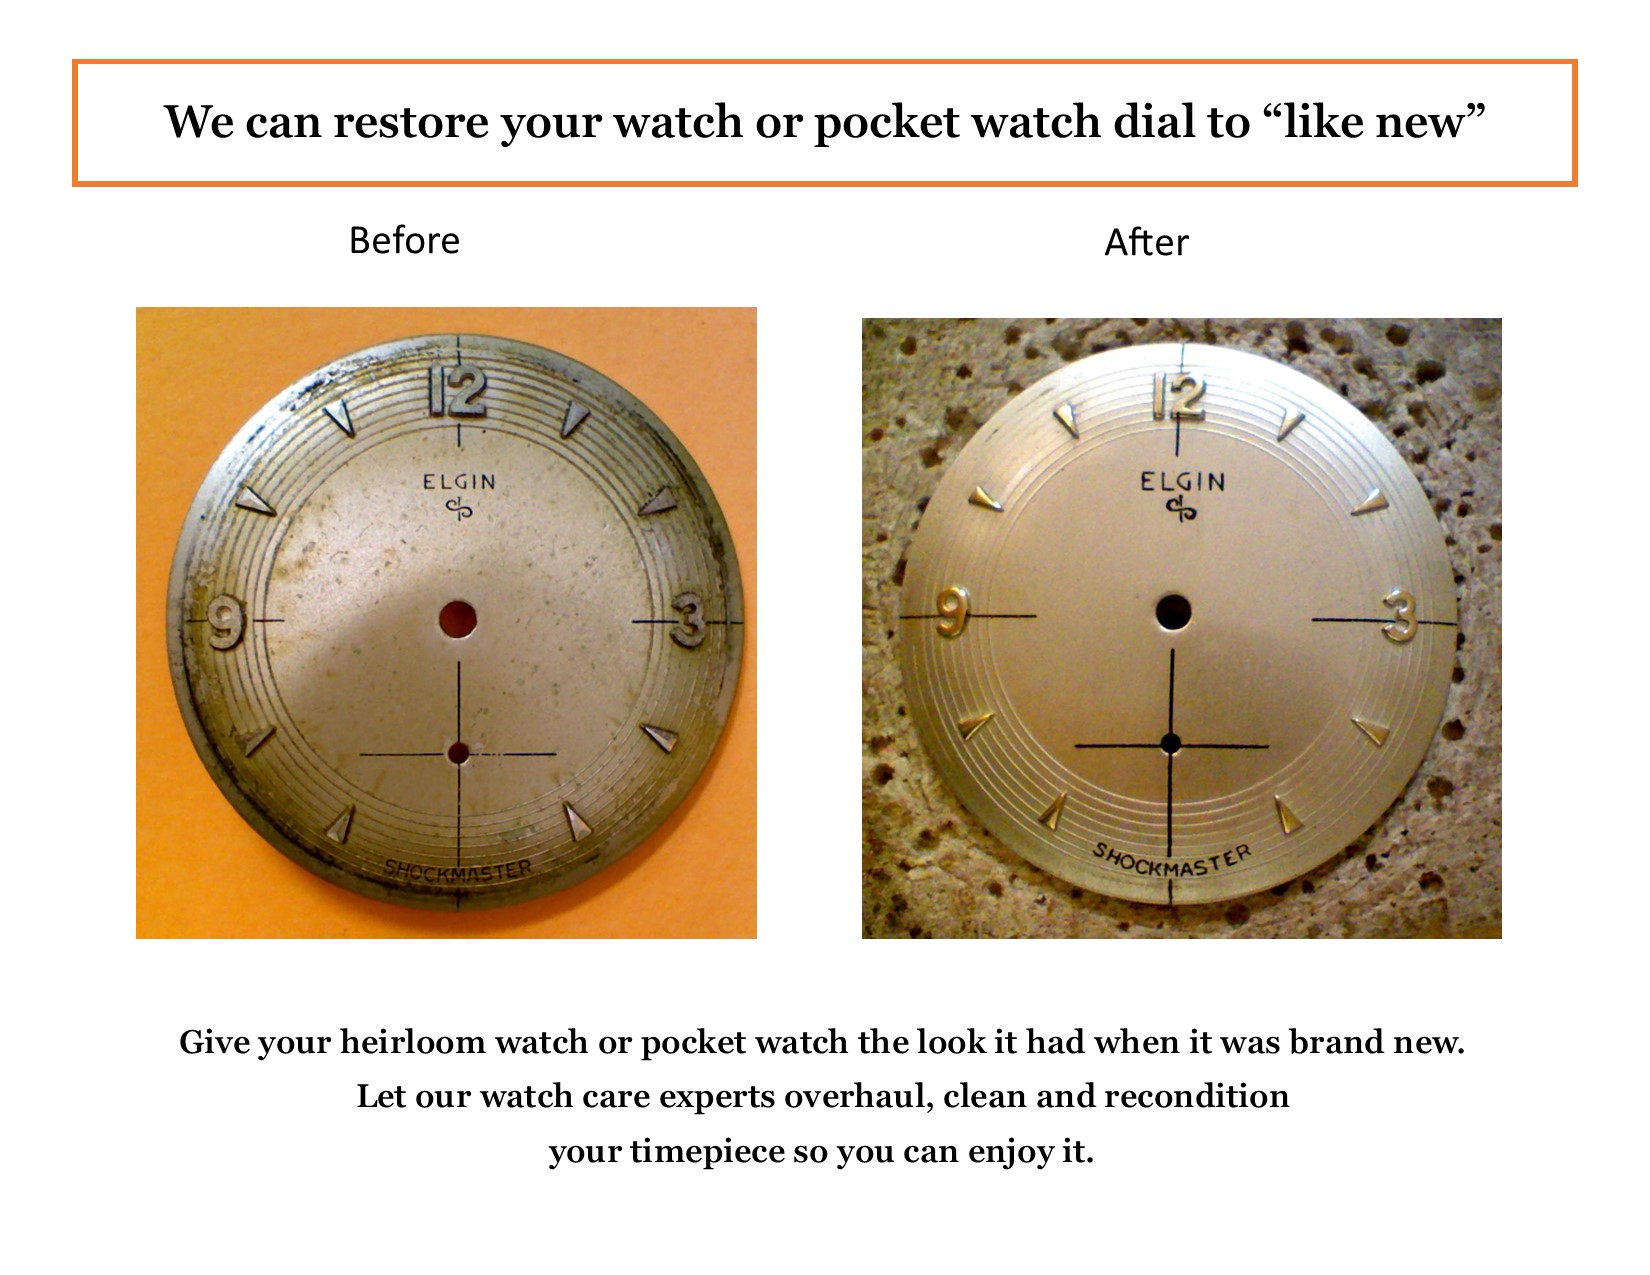 We can refinish your watch dial to "like new"